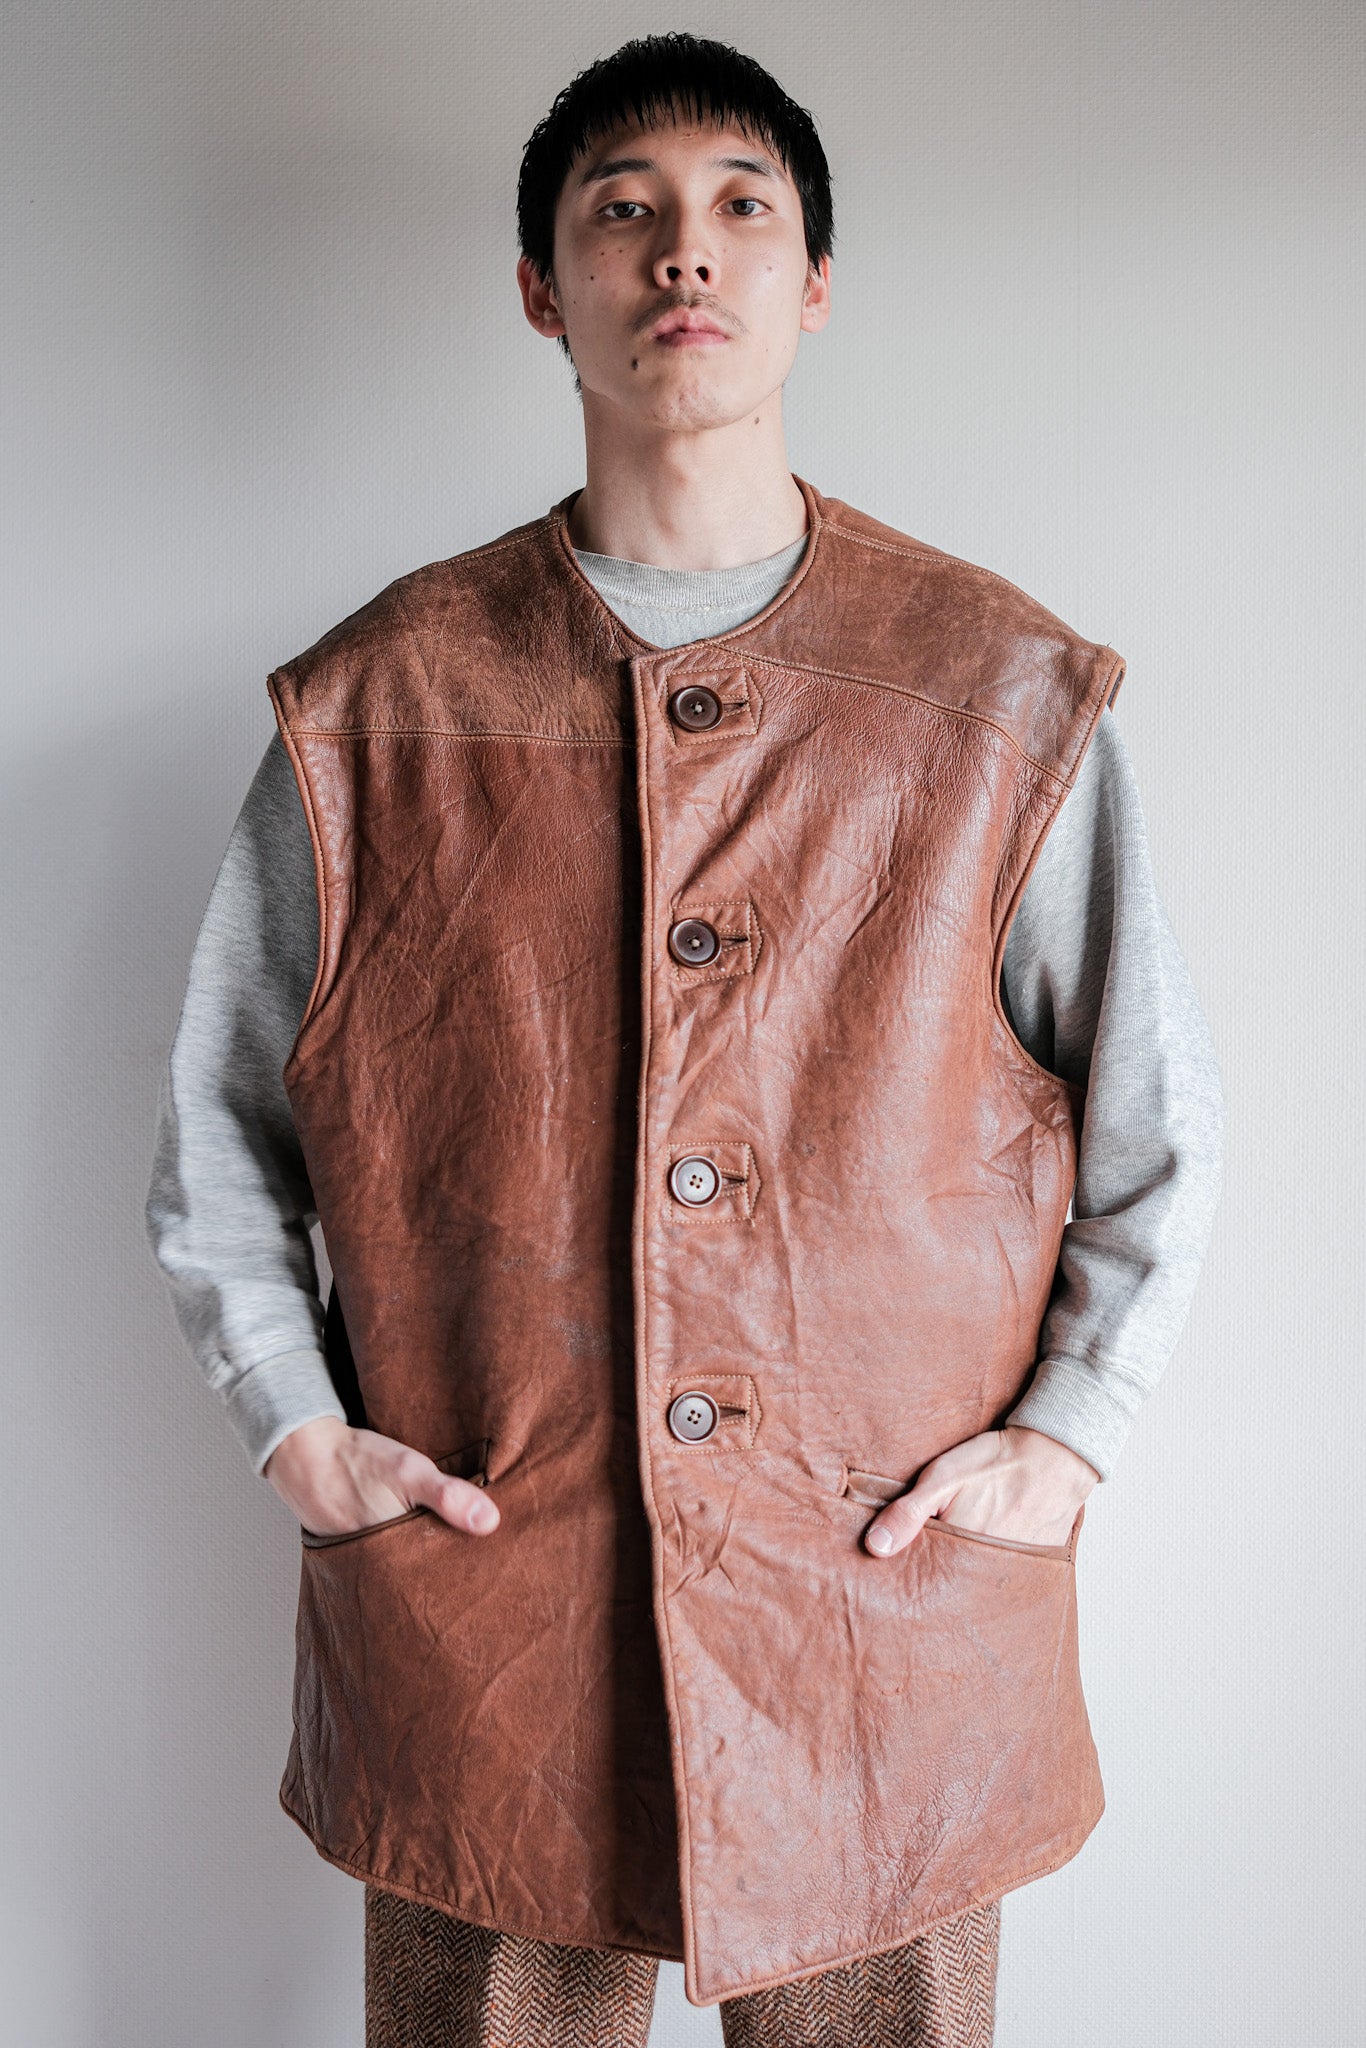 [~ 40's] WWⅱ British Army Jerkin Le cuir gilet Taille.2 "Modified"